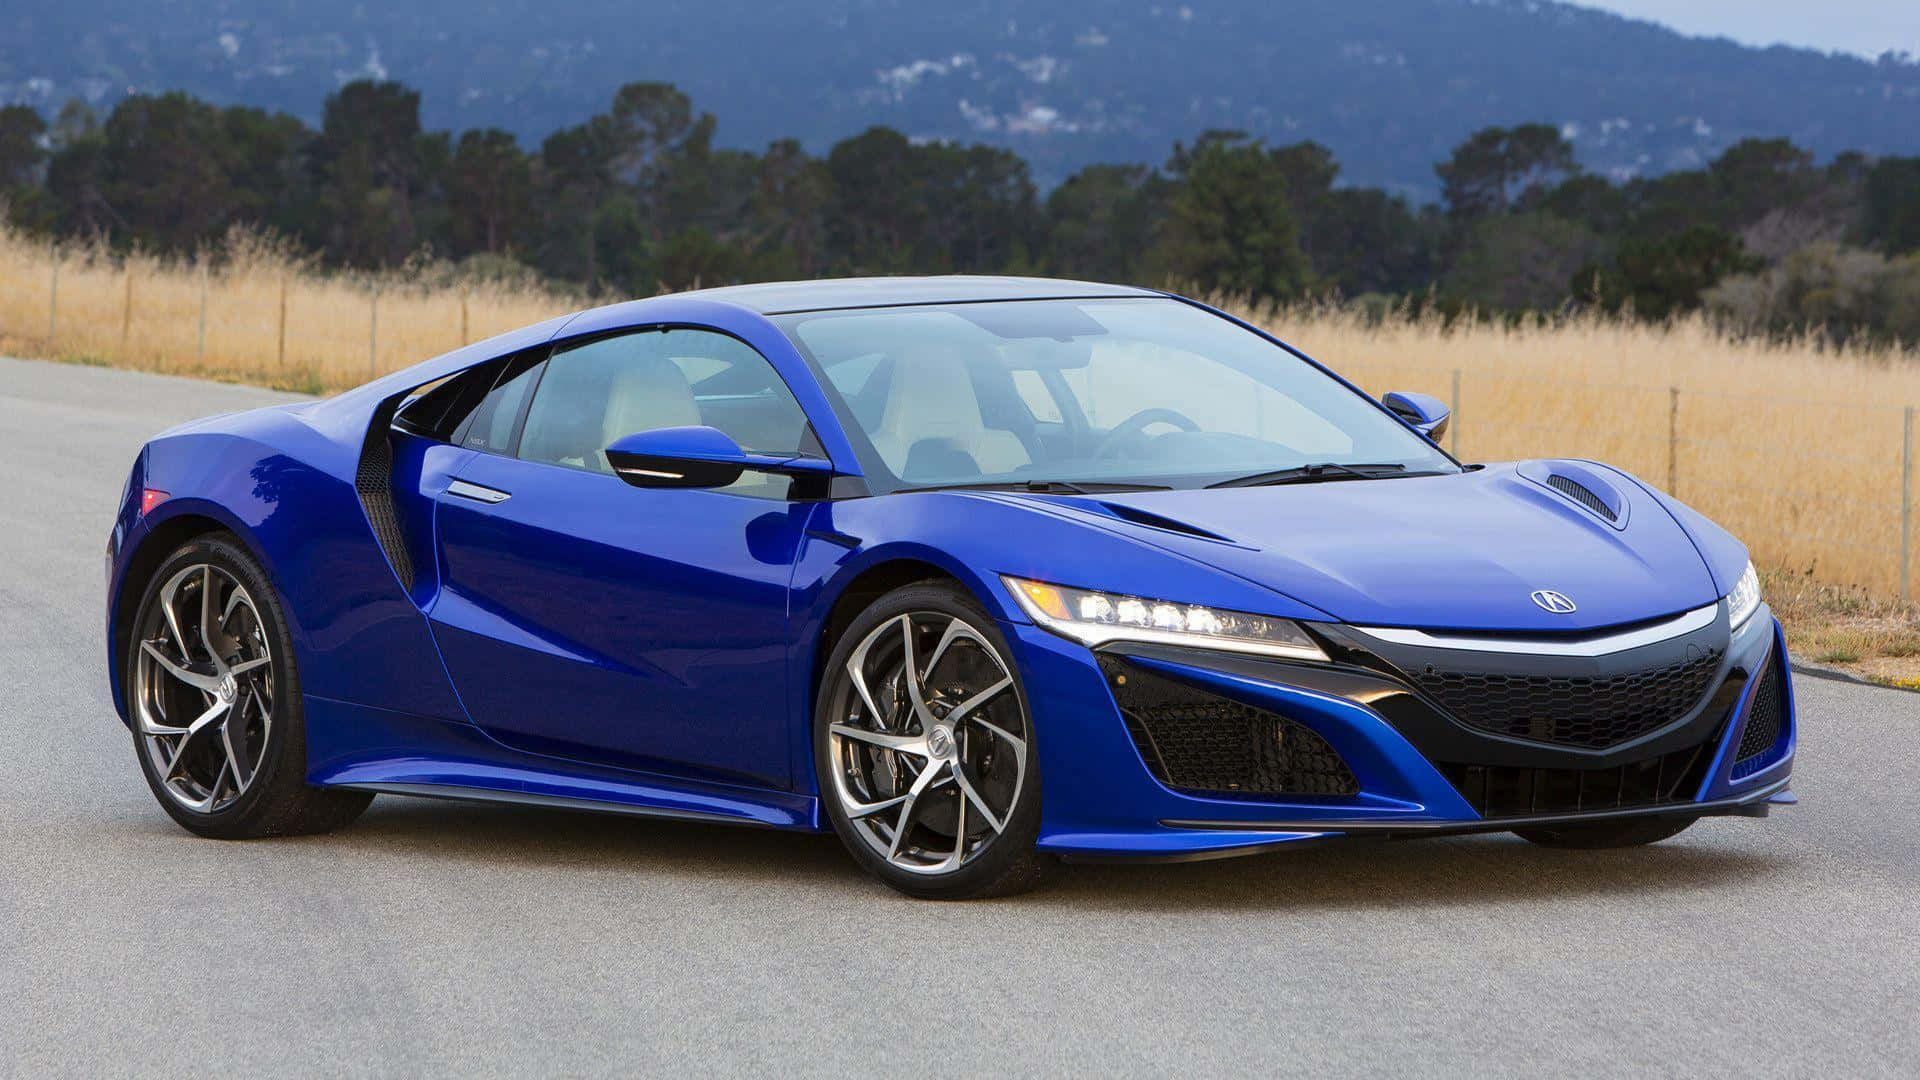 A striking Acura NSX on the road Wallpaper